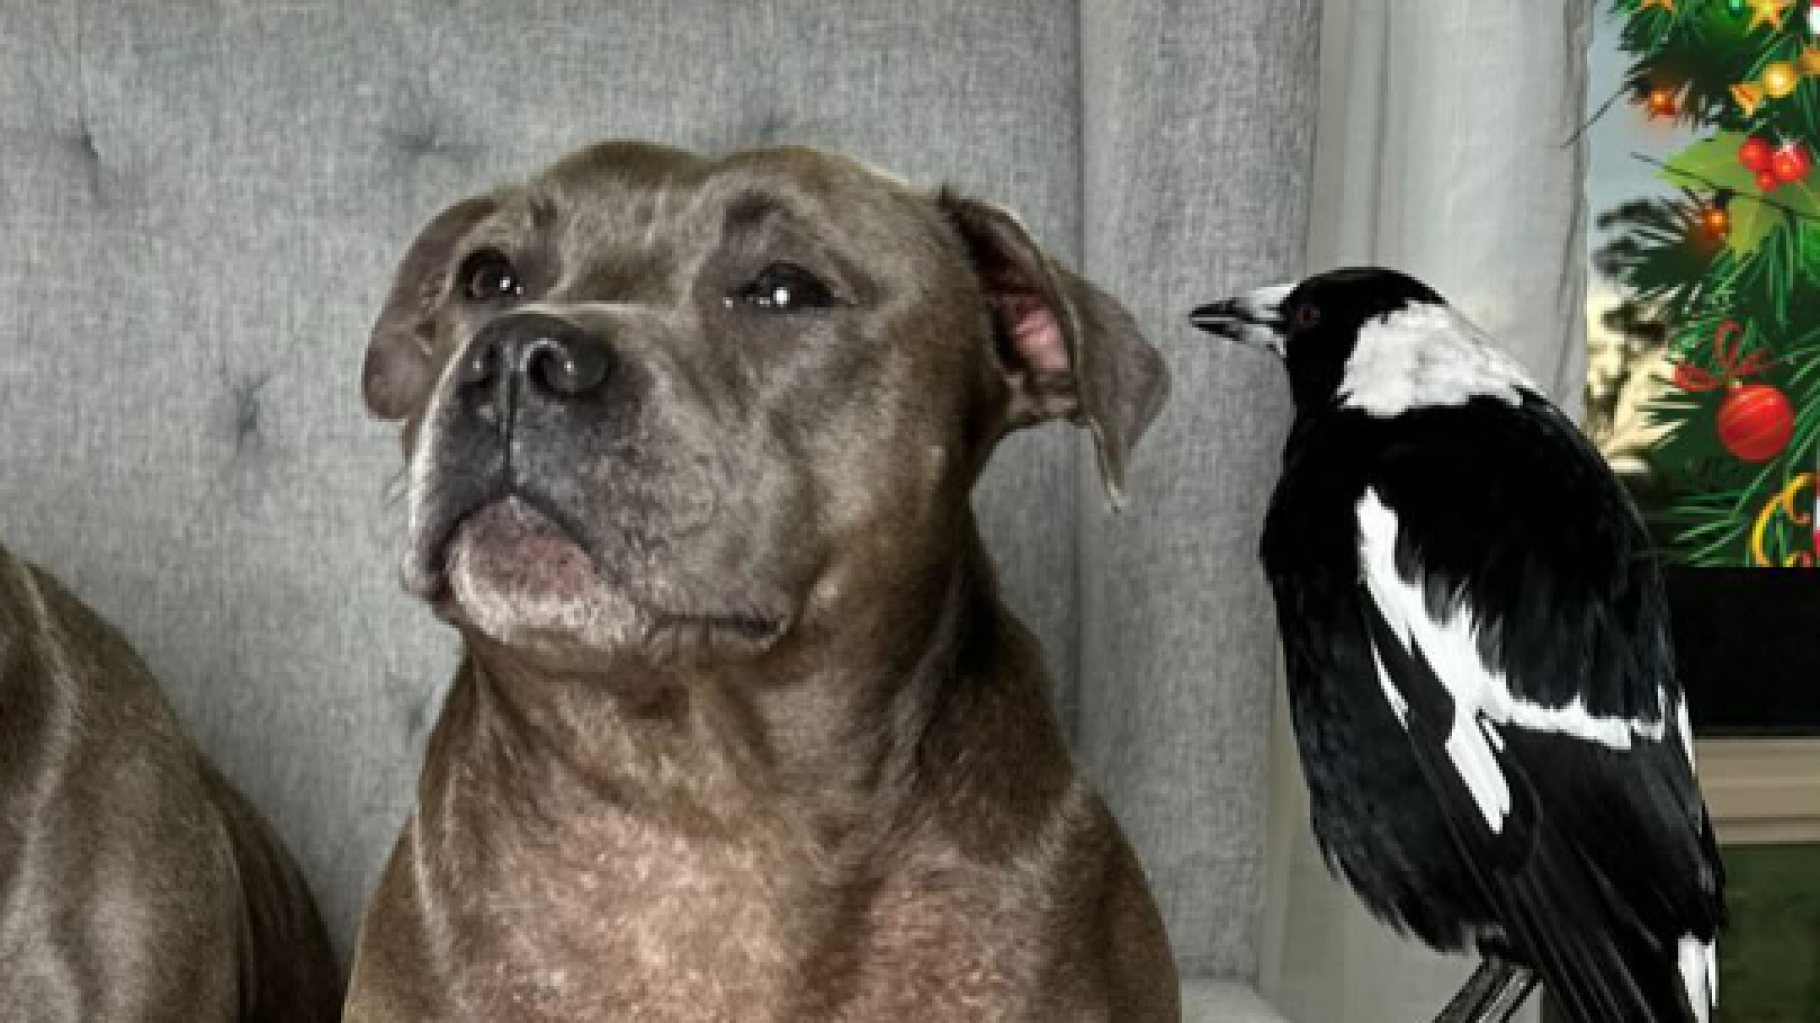 “Peggy and Molly”, a magpie and social media dog star split, Australia in turmoil